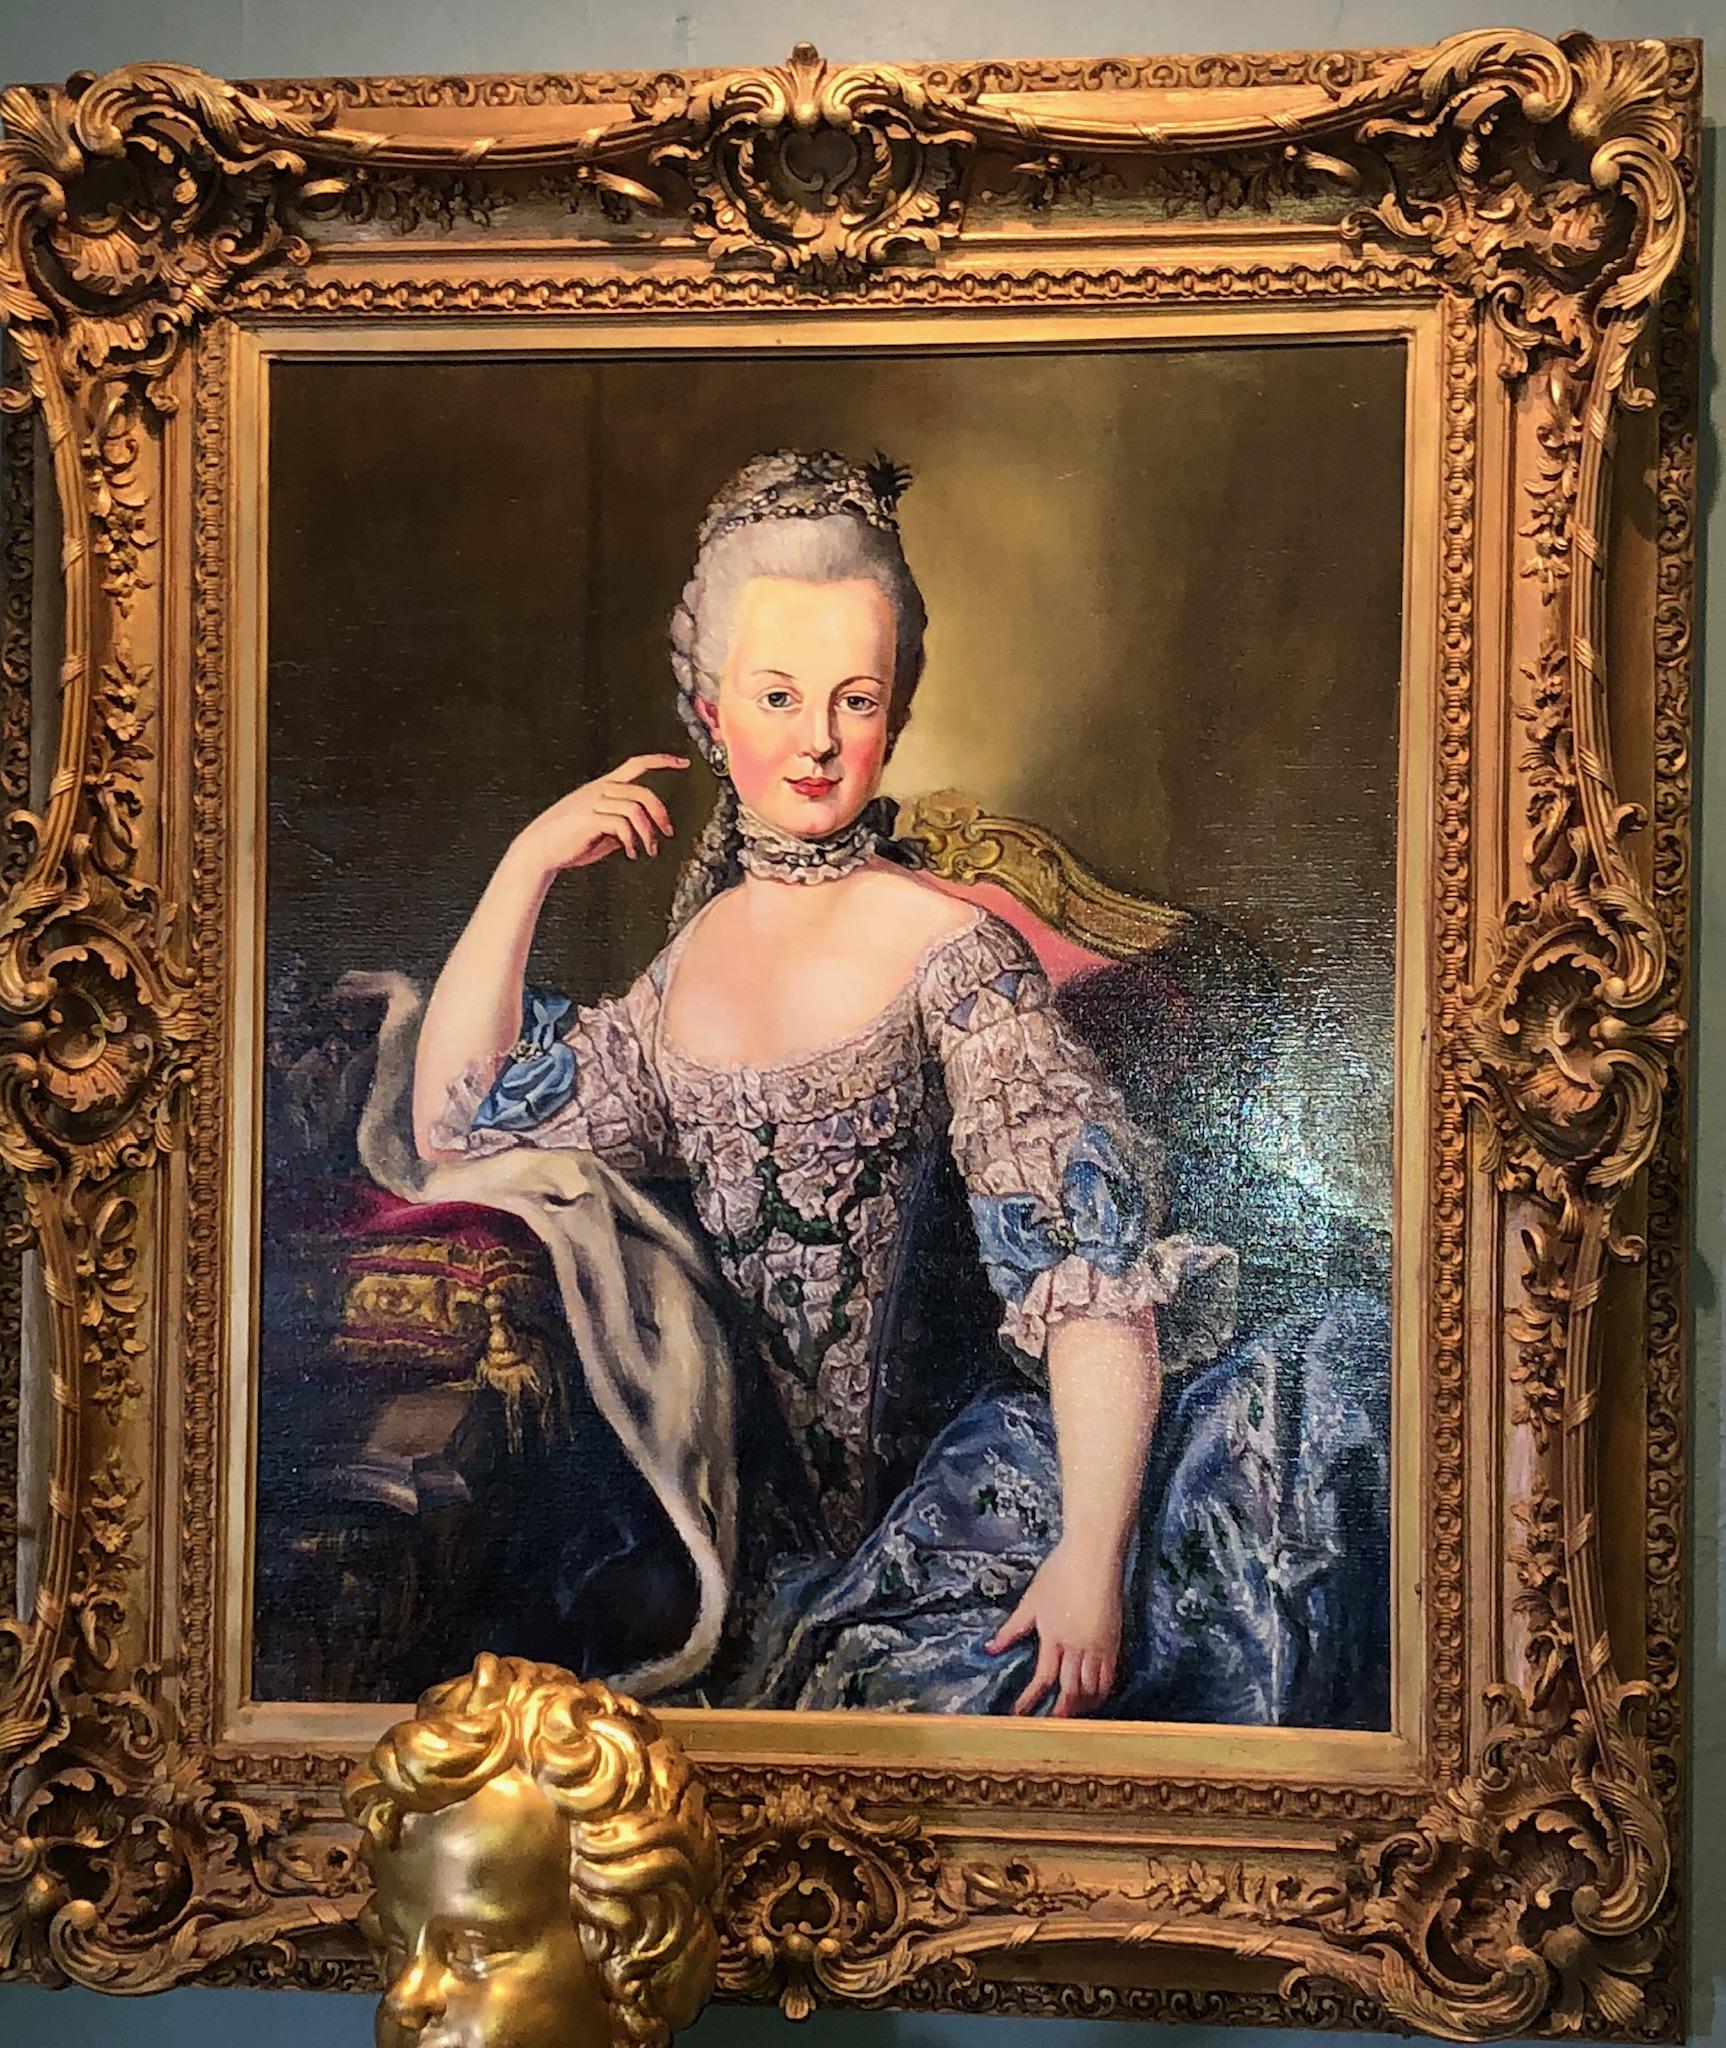 In 1770, the Austrian Court painter of the Empress Marie-Therese, M. Van Meyten created this portrait of Maria Antonia Josepha Johanna at age 14, to be sent to the King of France, Louis XV (and perhaps a little for the Dauphin/Crown Prince). She